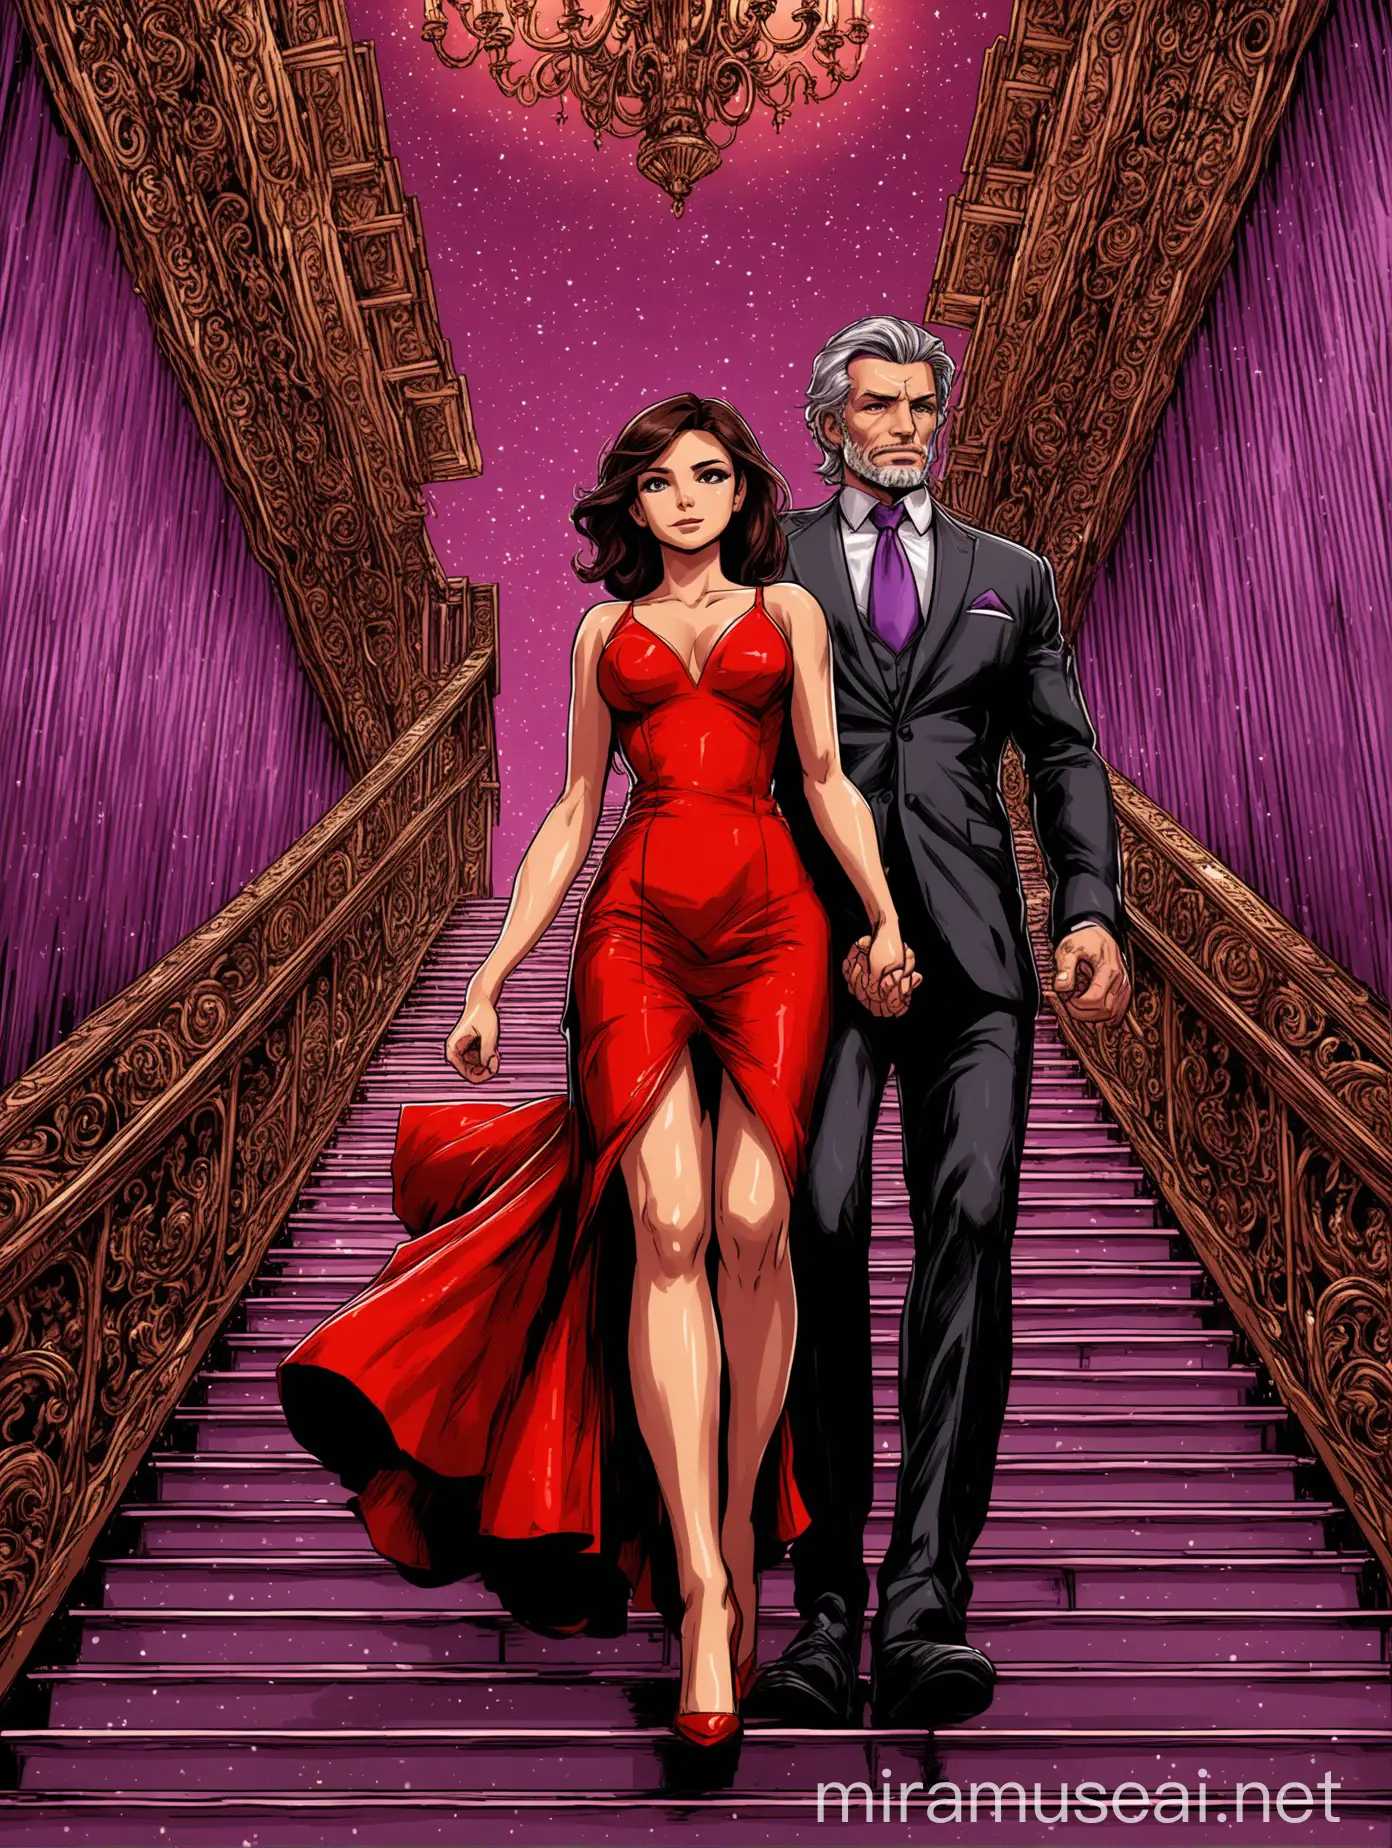 Elegant Couple Descending Sparkling Staircase in Red and Purple Tones